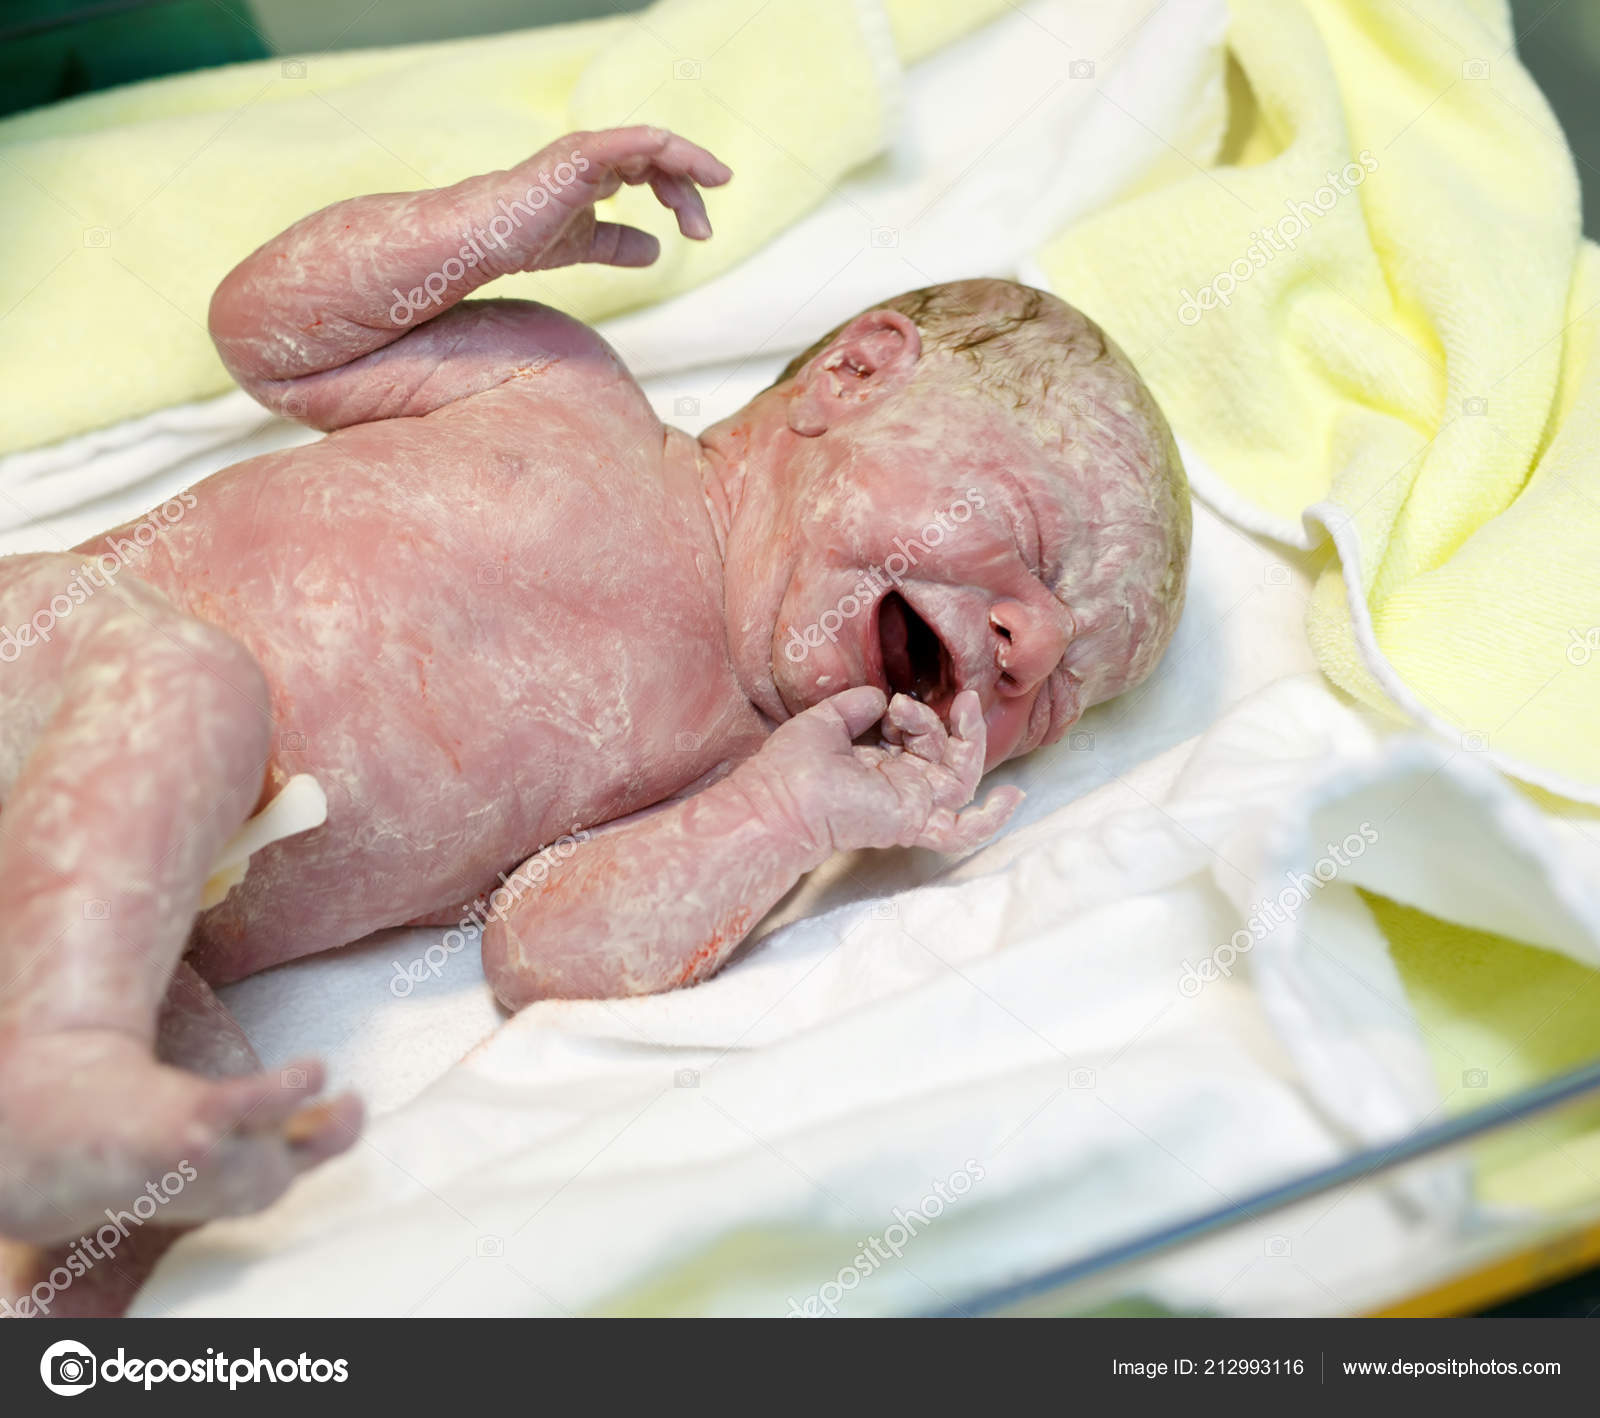 Newborn child seconds and minutes after birth. Cute tiny new born baby girl  on towel. New life, beginning, healthcare Stock Photo by ©romrodinka  212993116